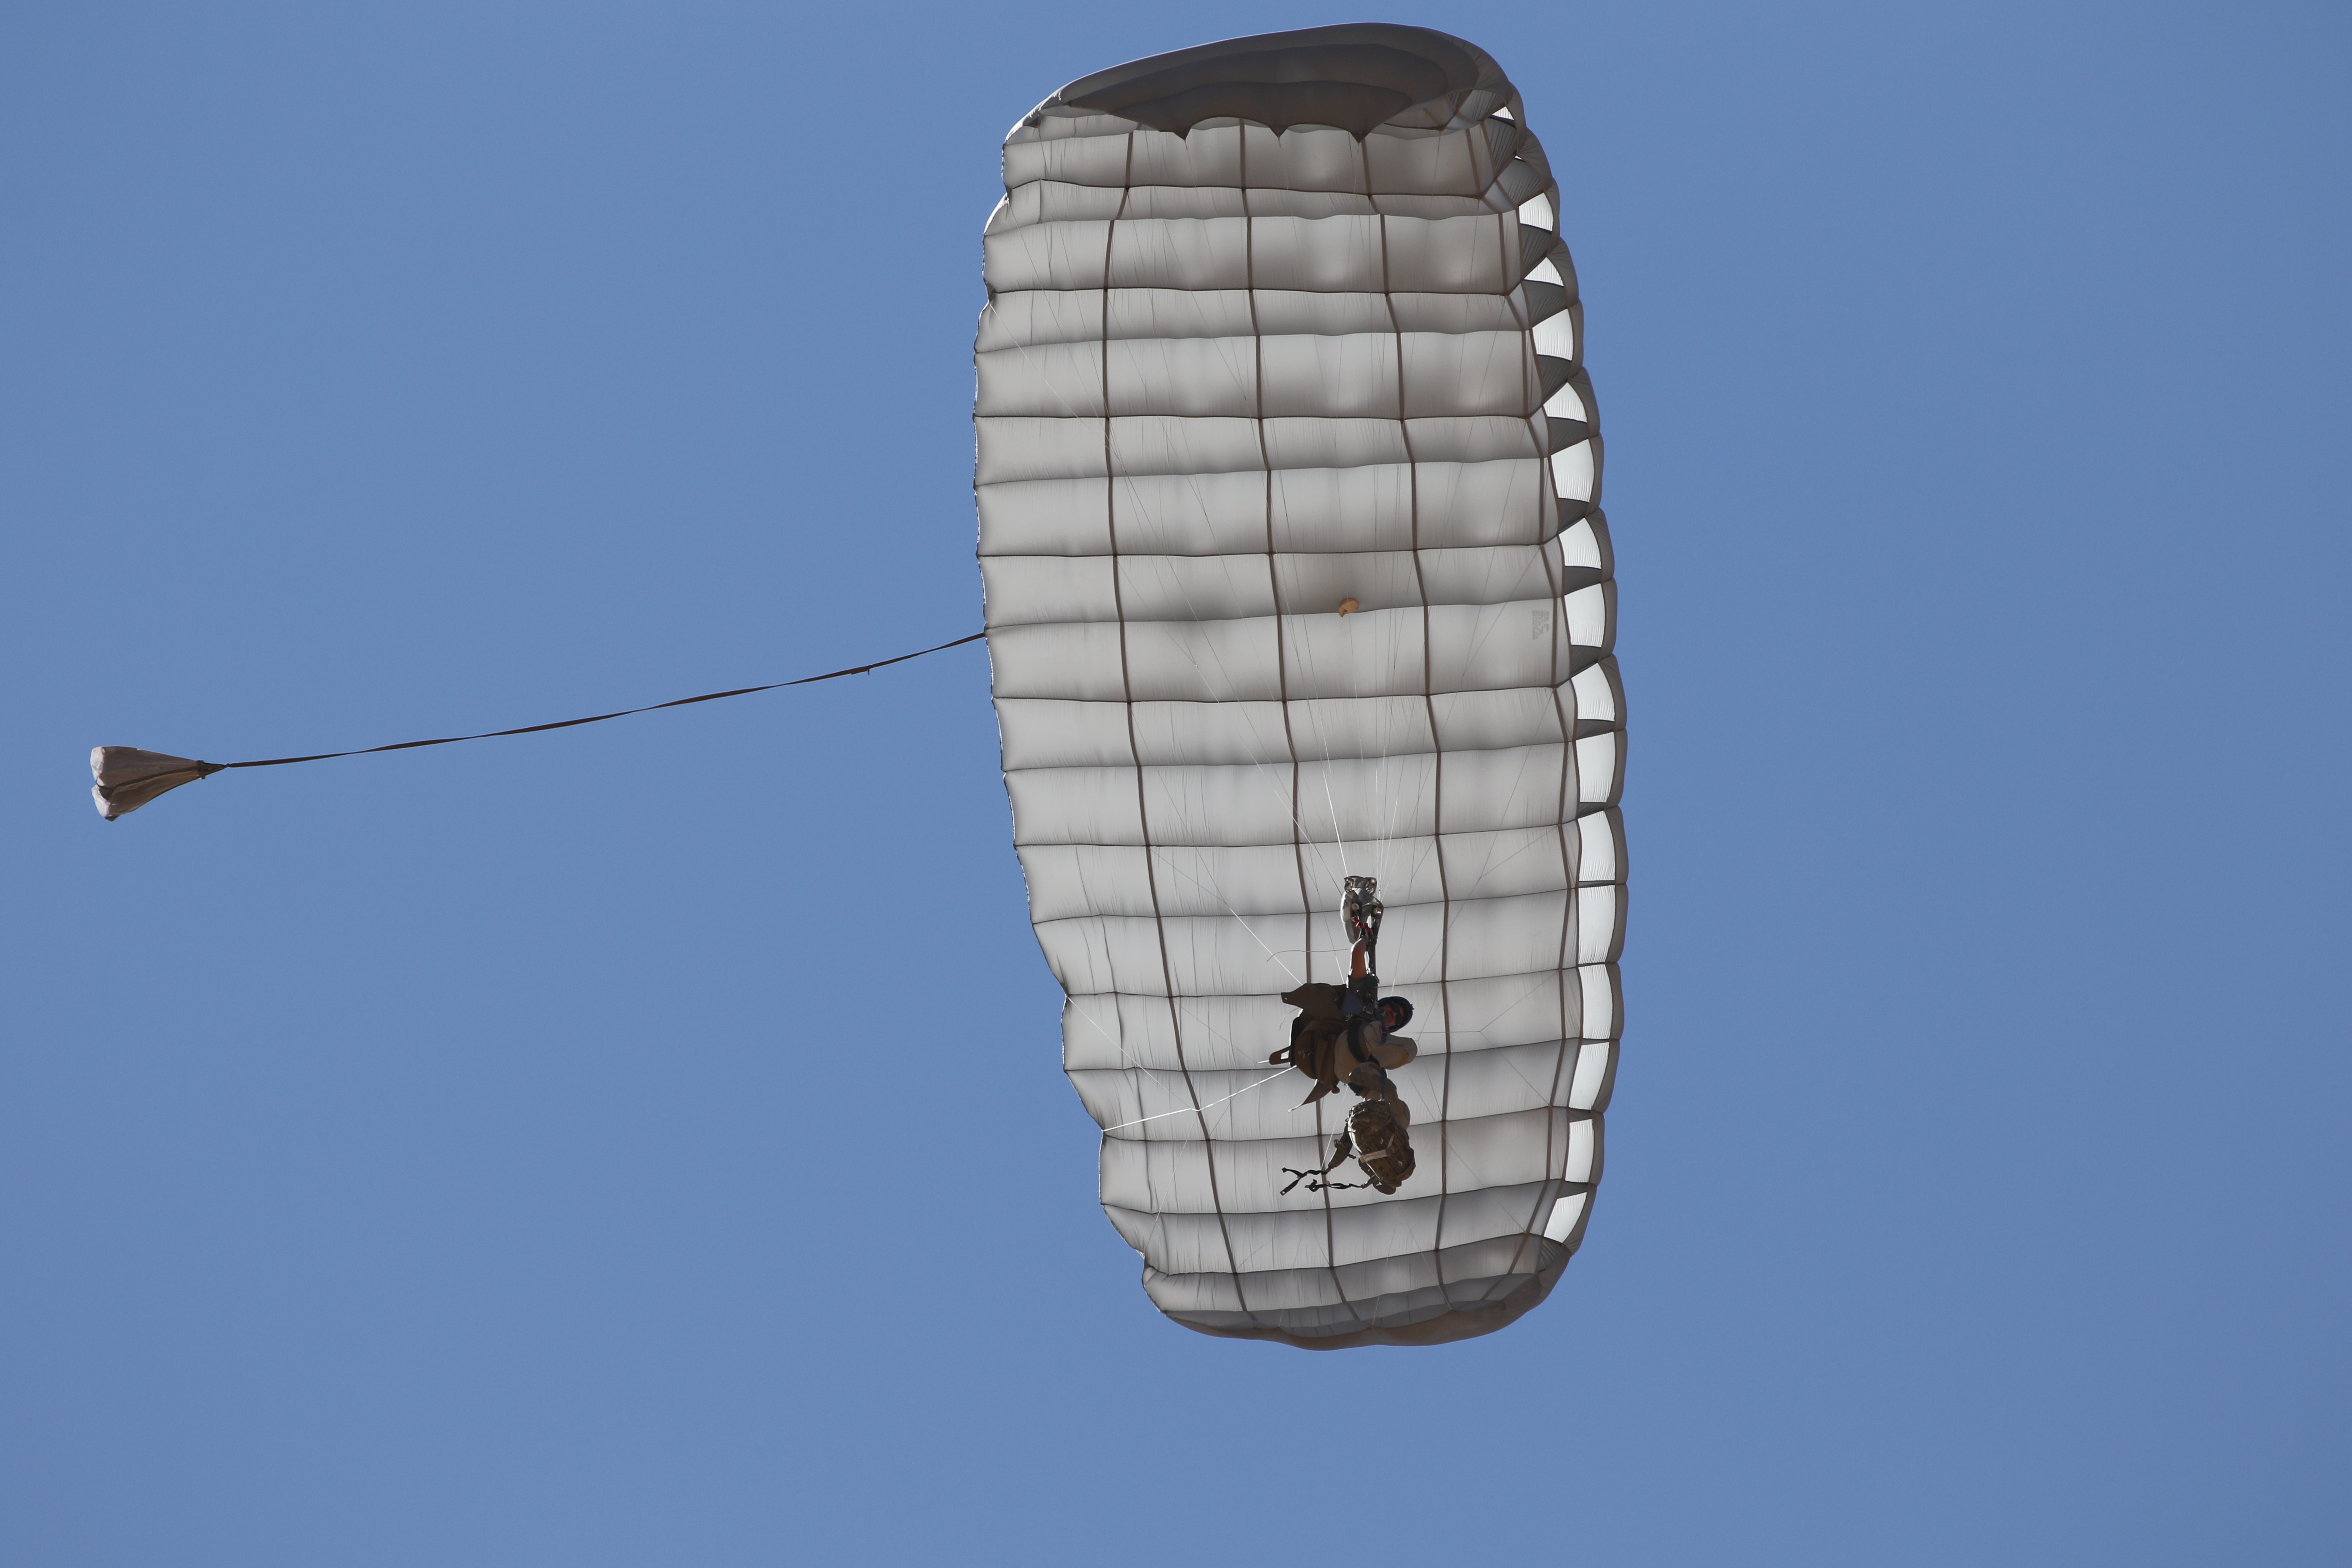 Airborne Systems Hi-5 Army Ram Air Parachute Personnel product system for military special forces jumpers with glide modulation. Carries 485 lbs. Max deployment altitude 25,000 feet. Deployed canopy and parachutist from below with blue sky.